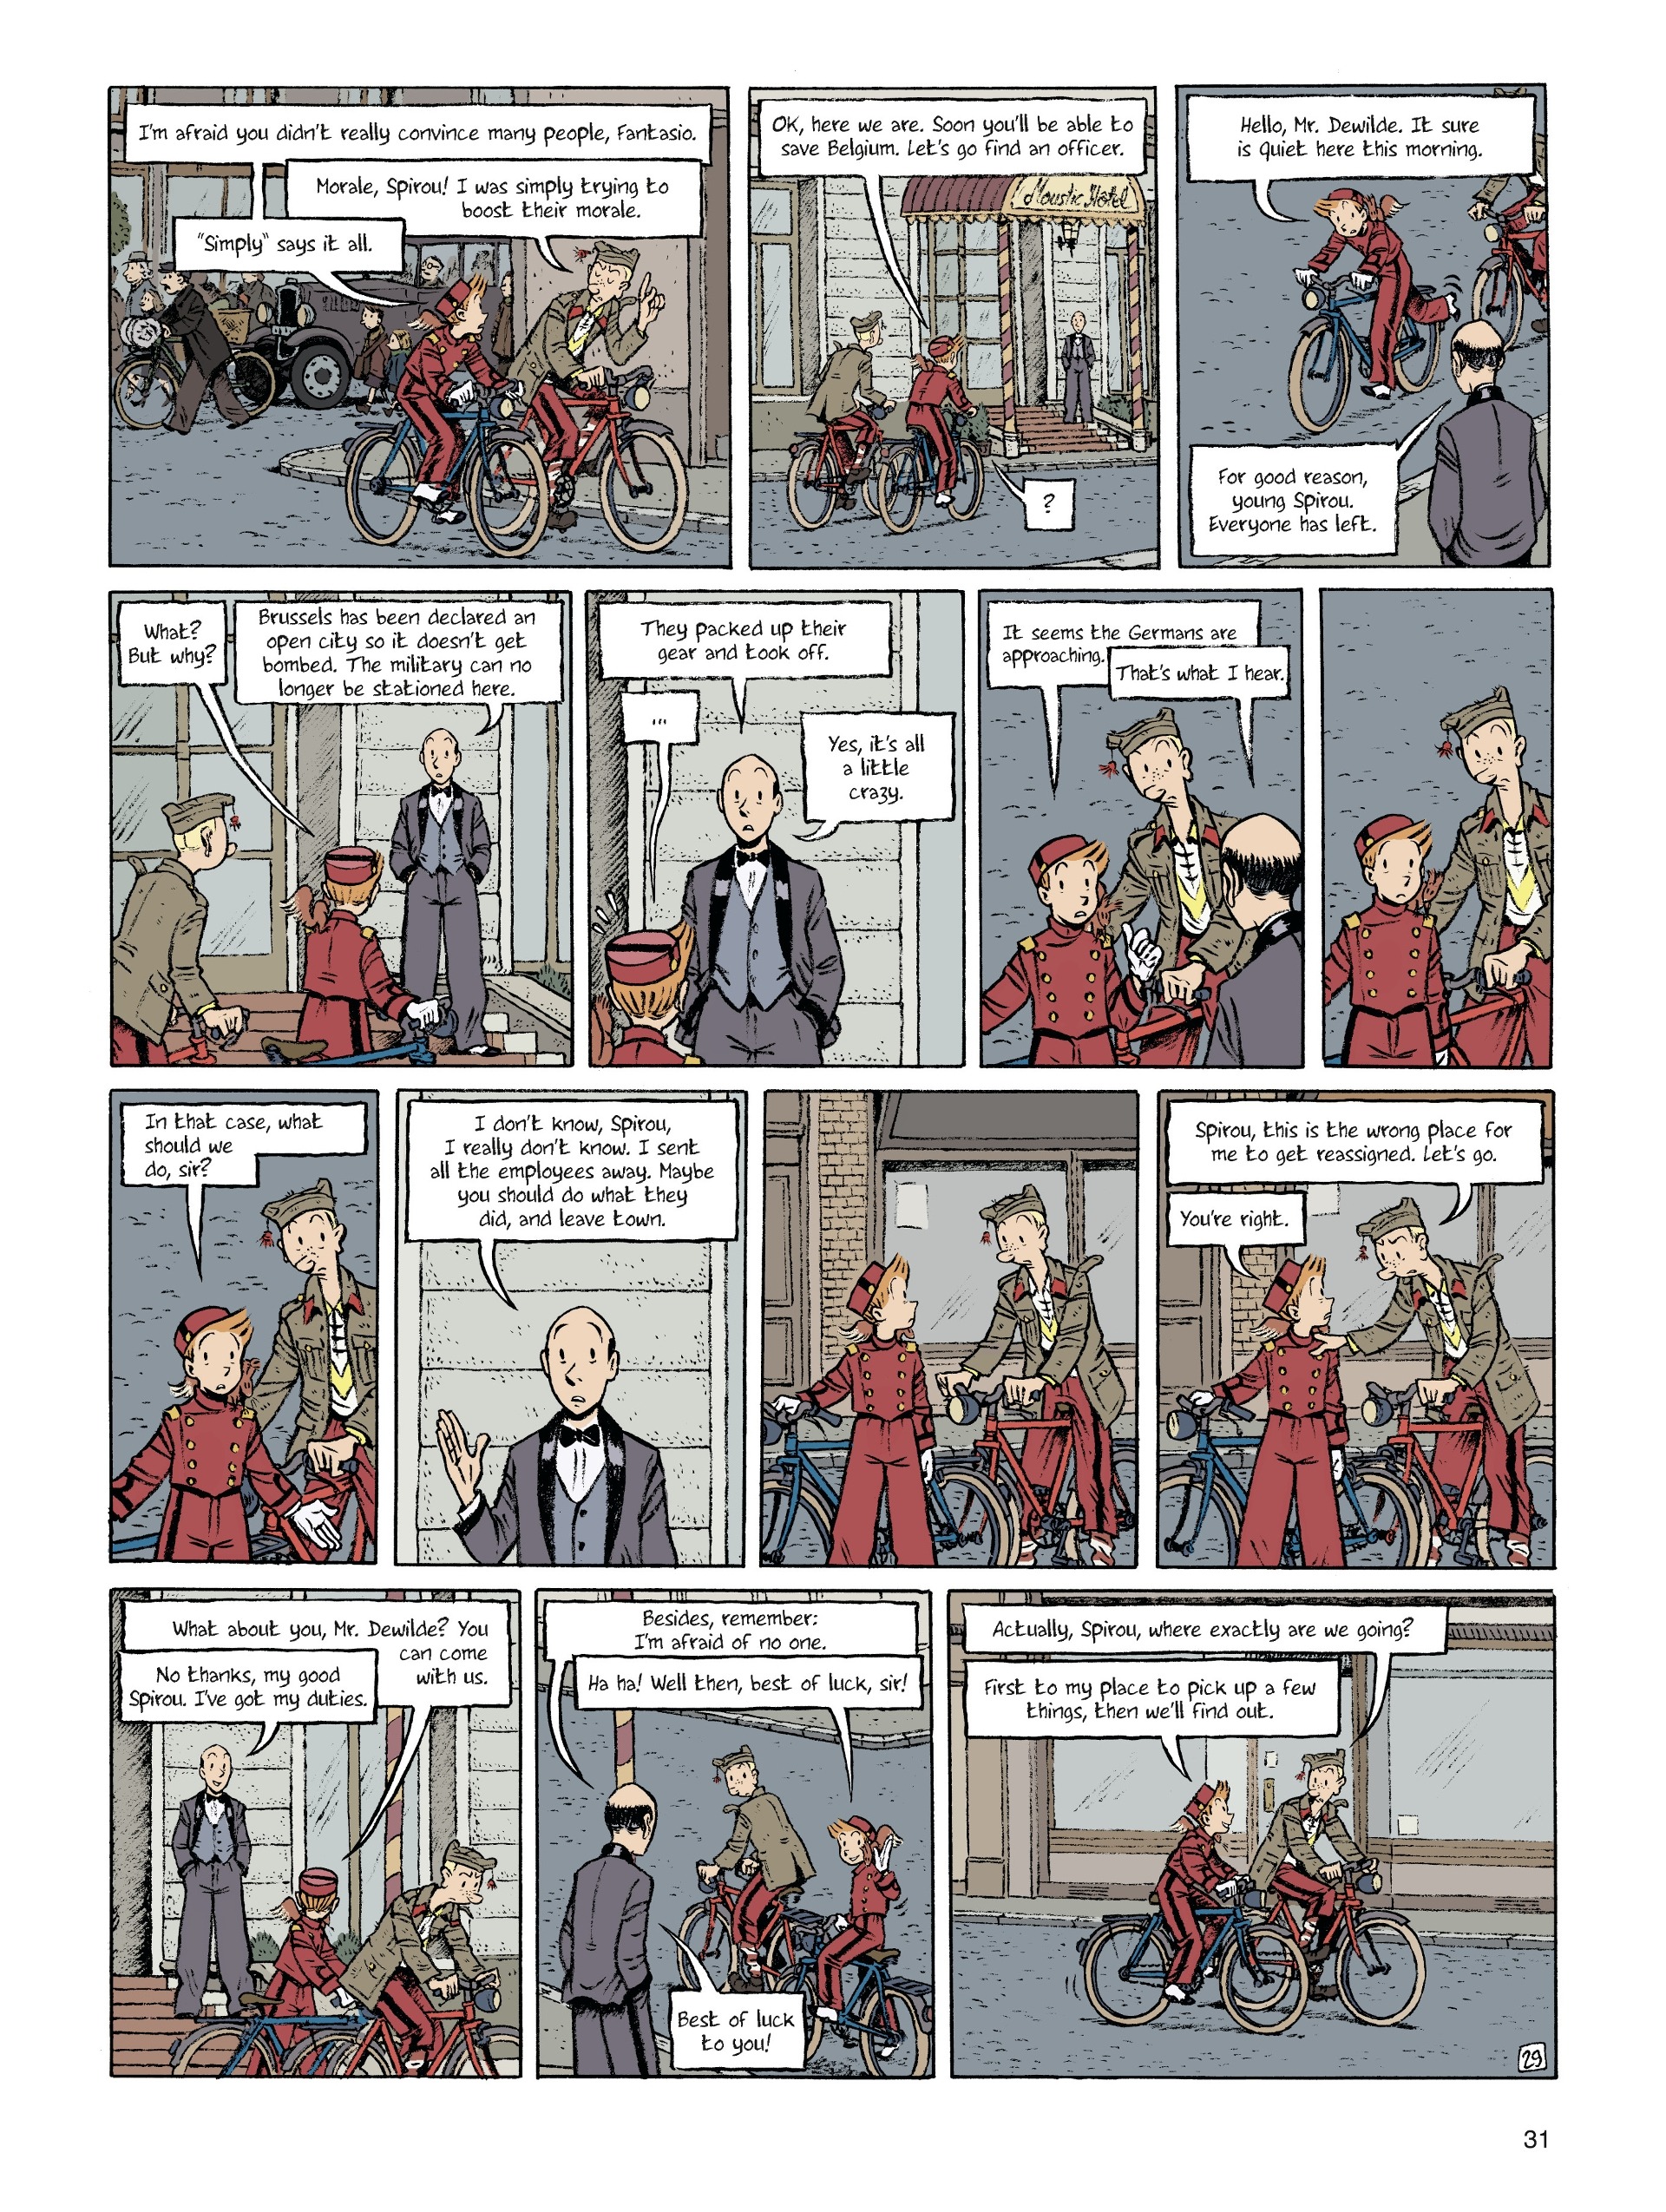 Read online Spirou: Hope Against All Odds comic -  Issue #1 - 31